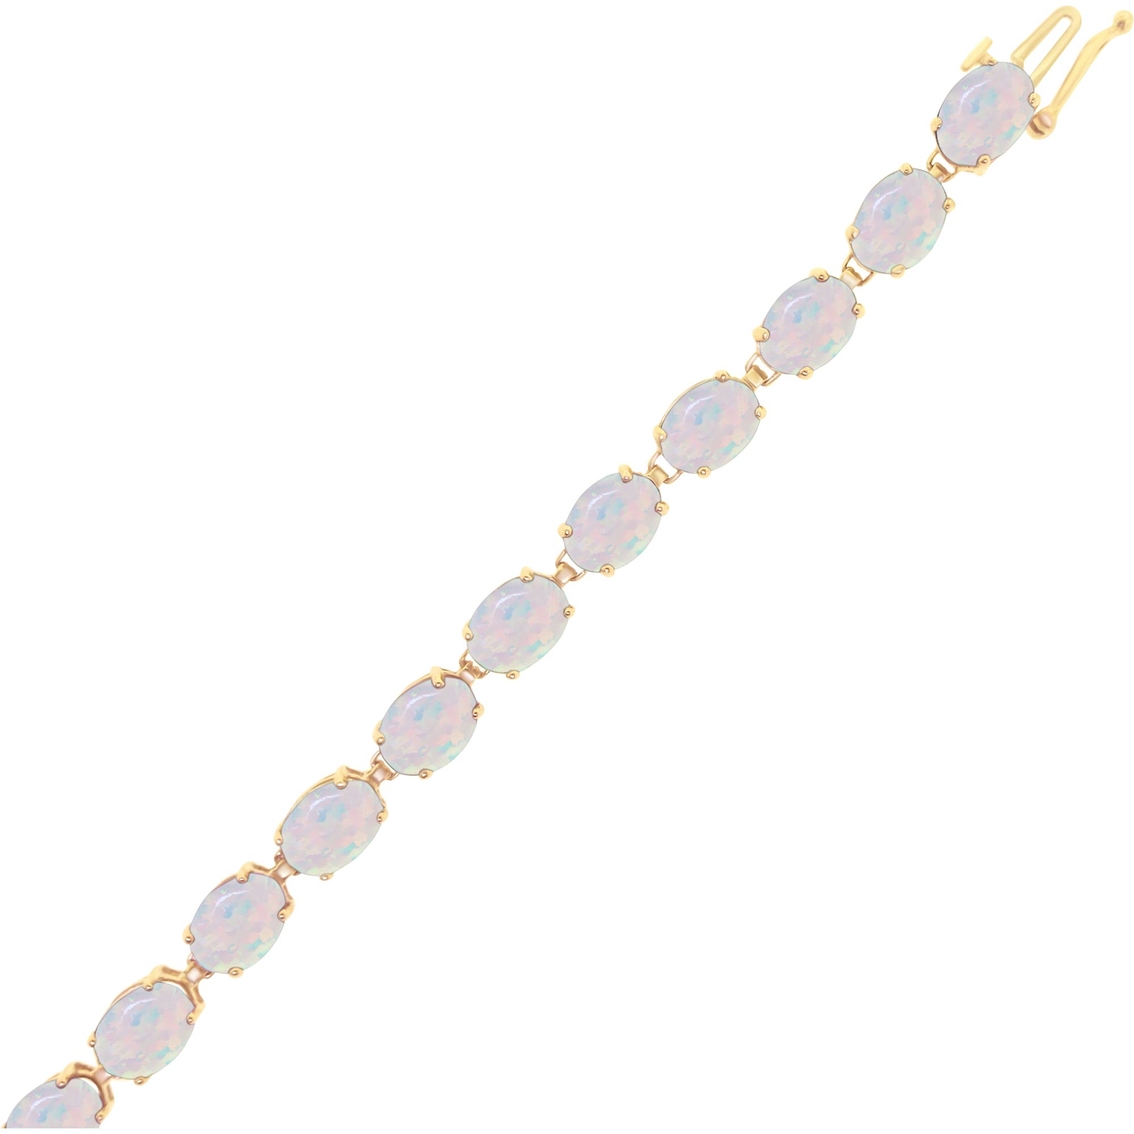 10K Yellow Gold Lab Created Opal Bracelet - Image 2 of 2